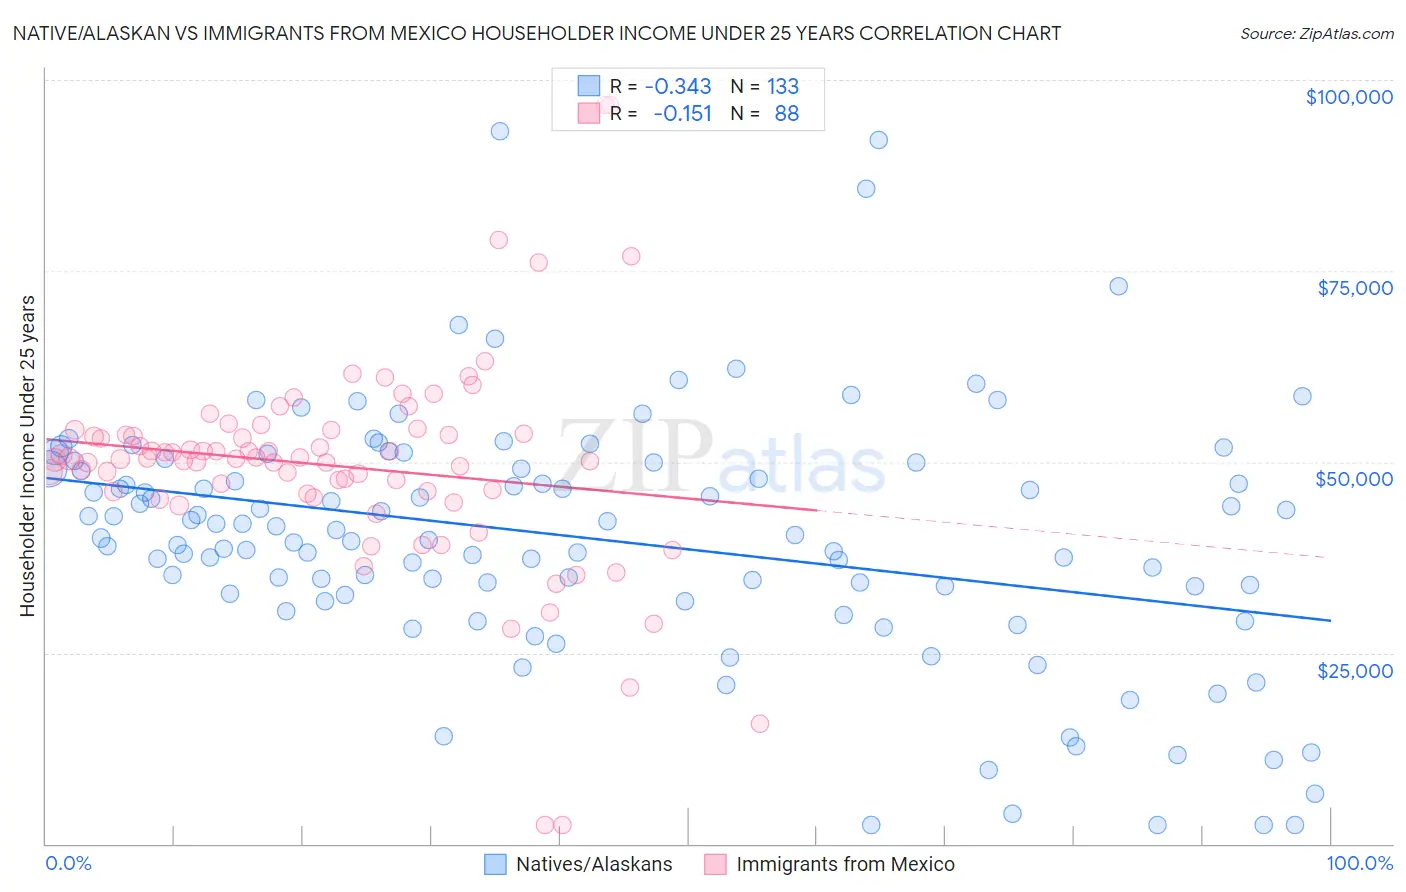 Native/Alaskan vs Immigrants from Mexico Householder Income Under 25 years